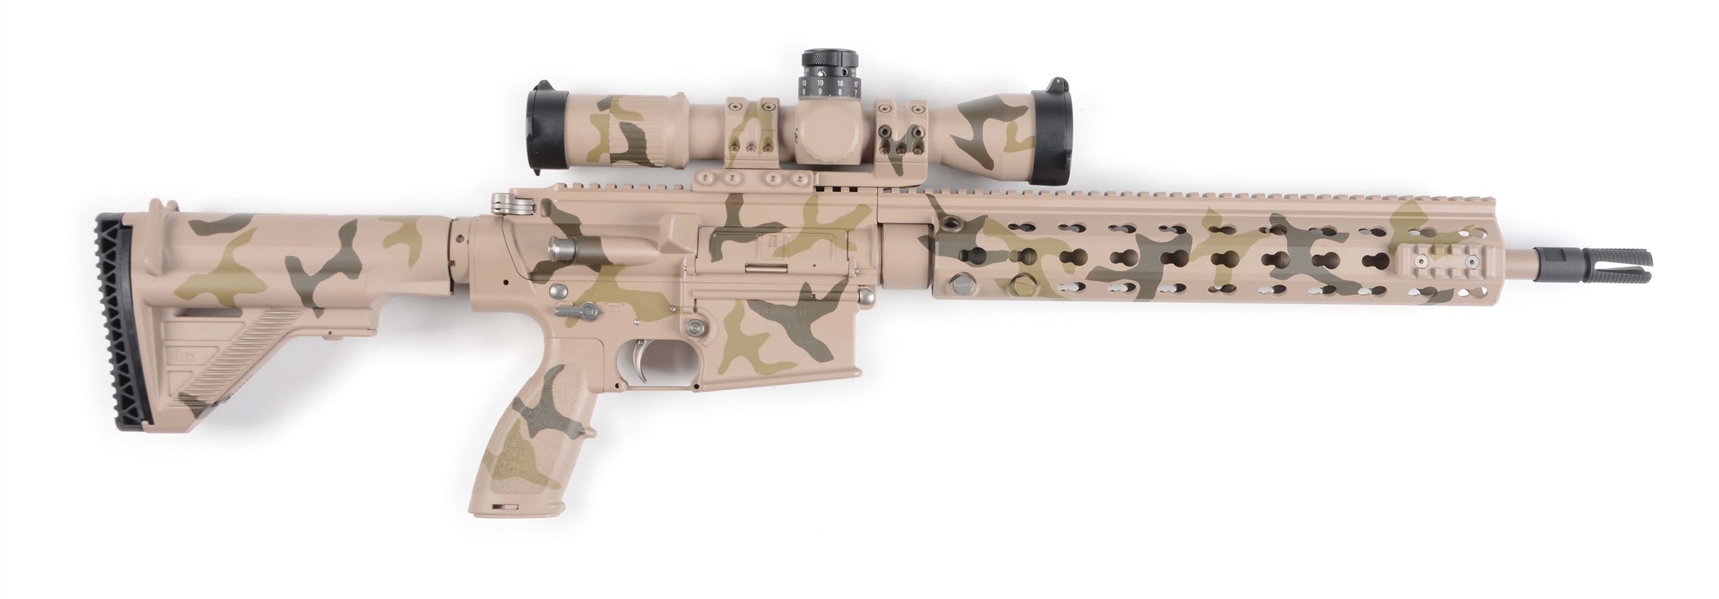 (M) FABULOUS “UNITED STATES PROPERTY” MARKED HECKLER & KOCH MR762A1 SPECIAL DESERT CAMOUFLAGED .308 SEMI-AUTOMATIC RIFLE IN SOFT CASE